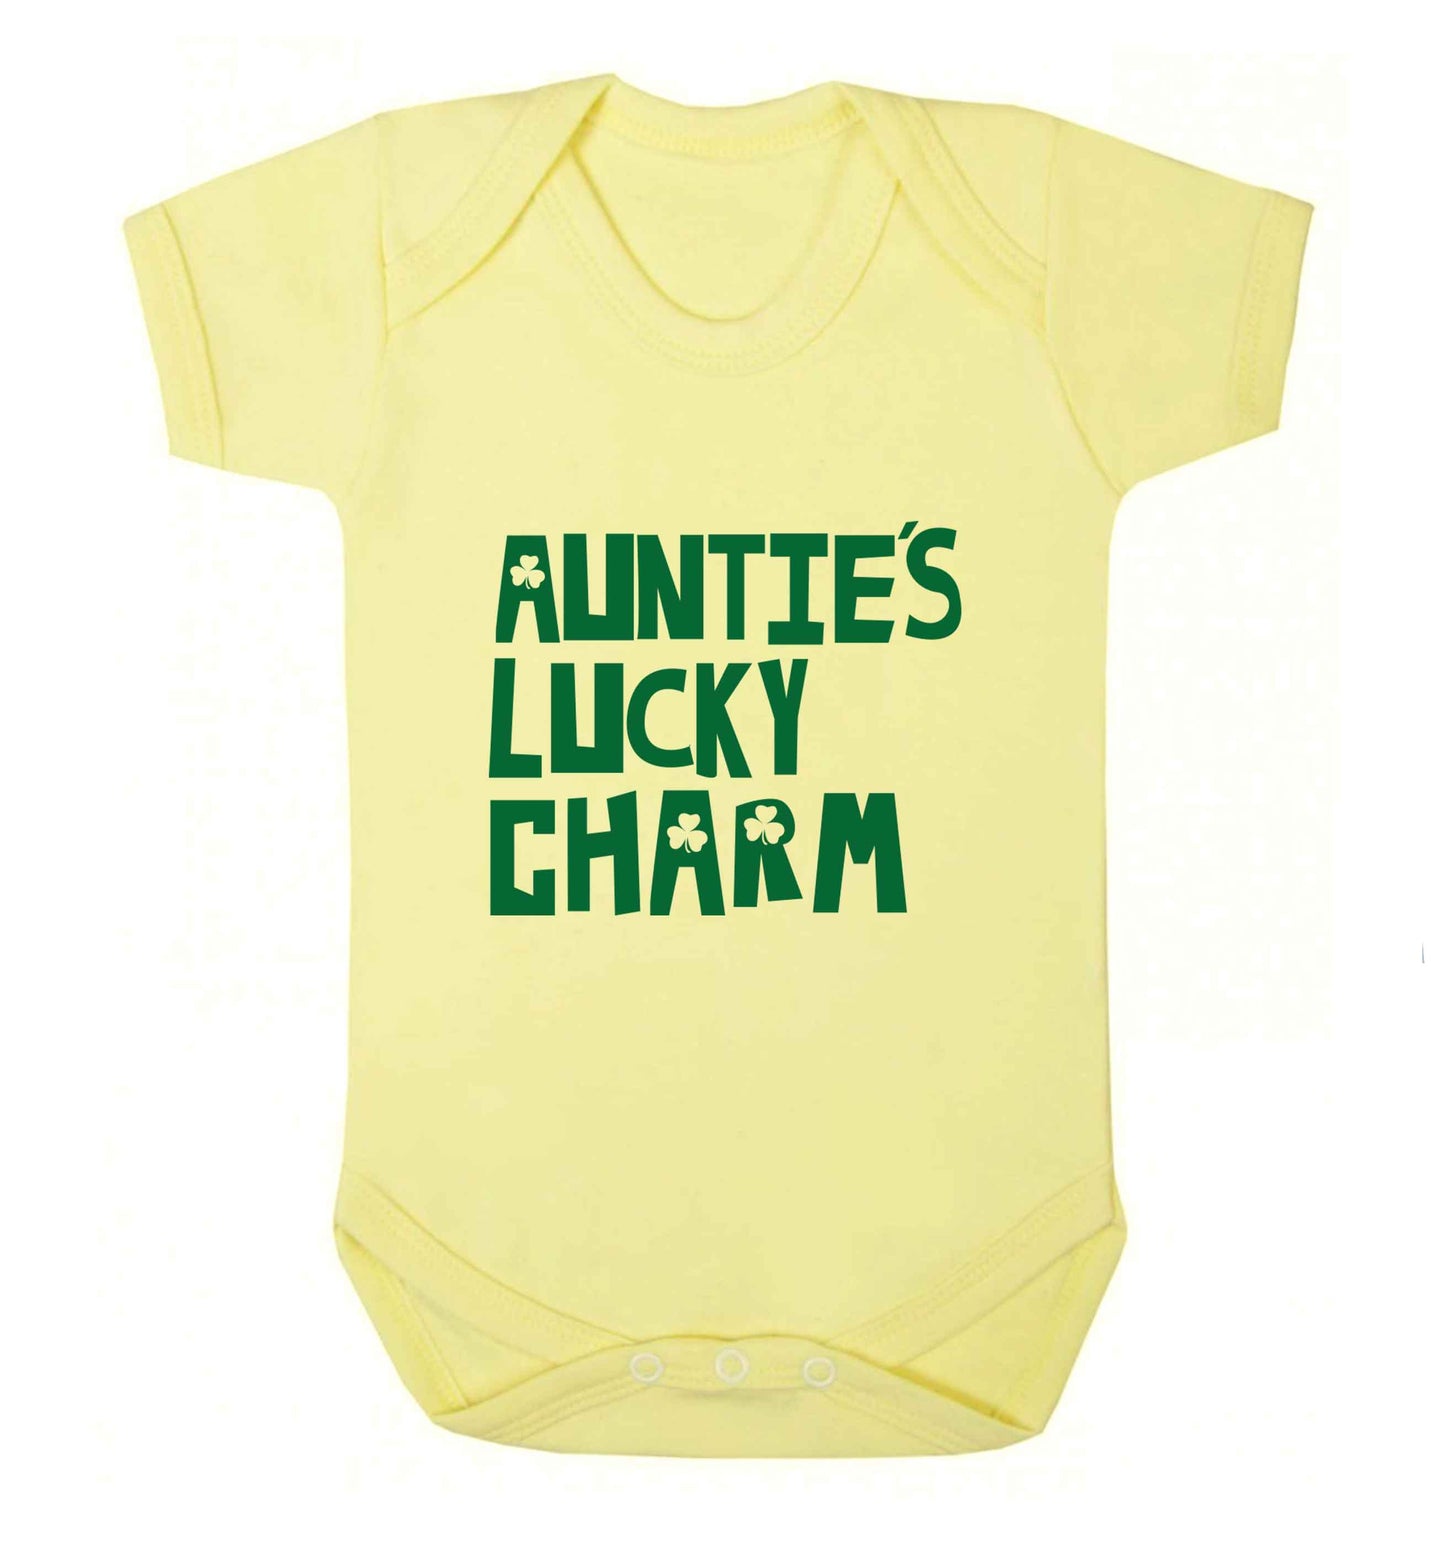 Auntie's lucky charm baby vest pale yellow 18-24 months